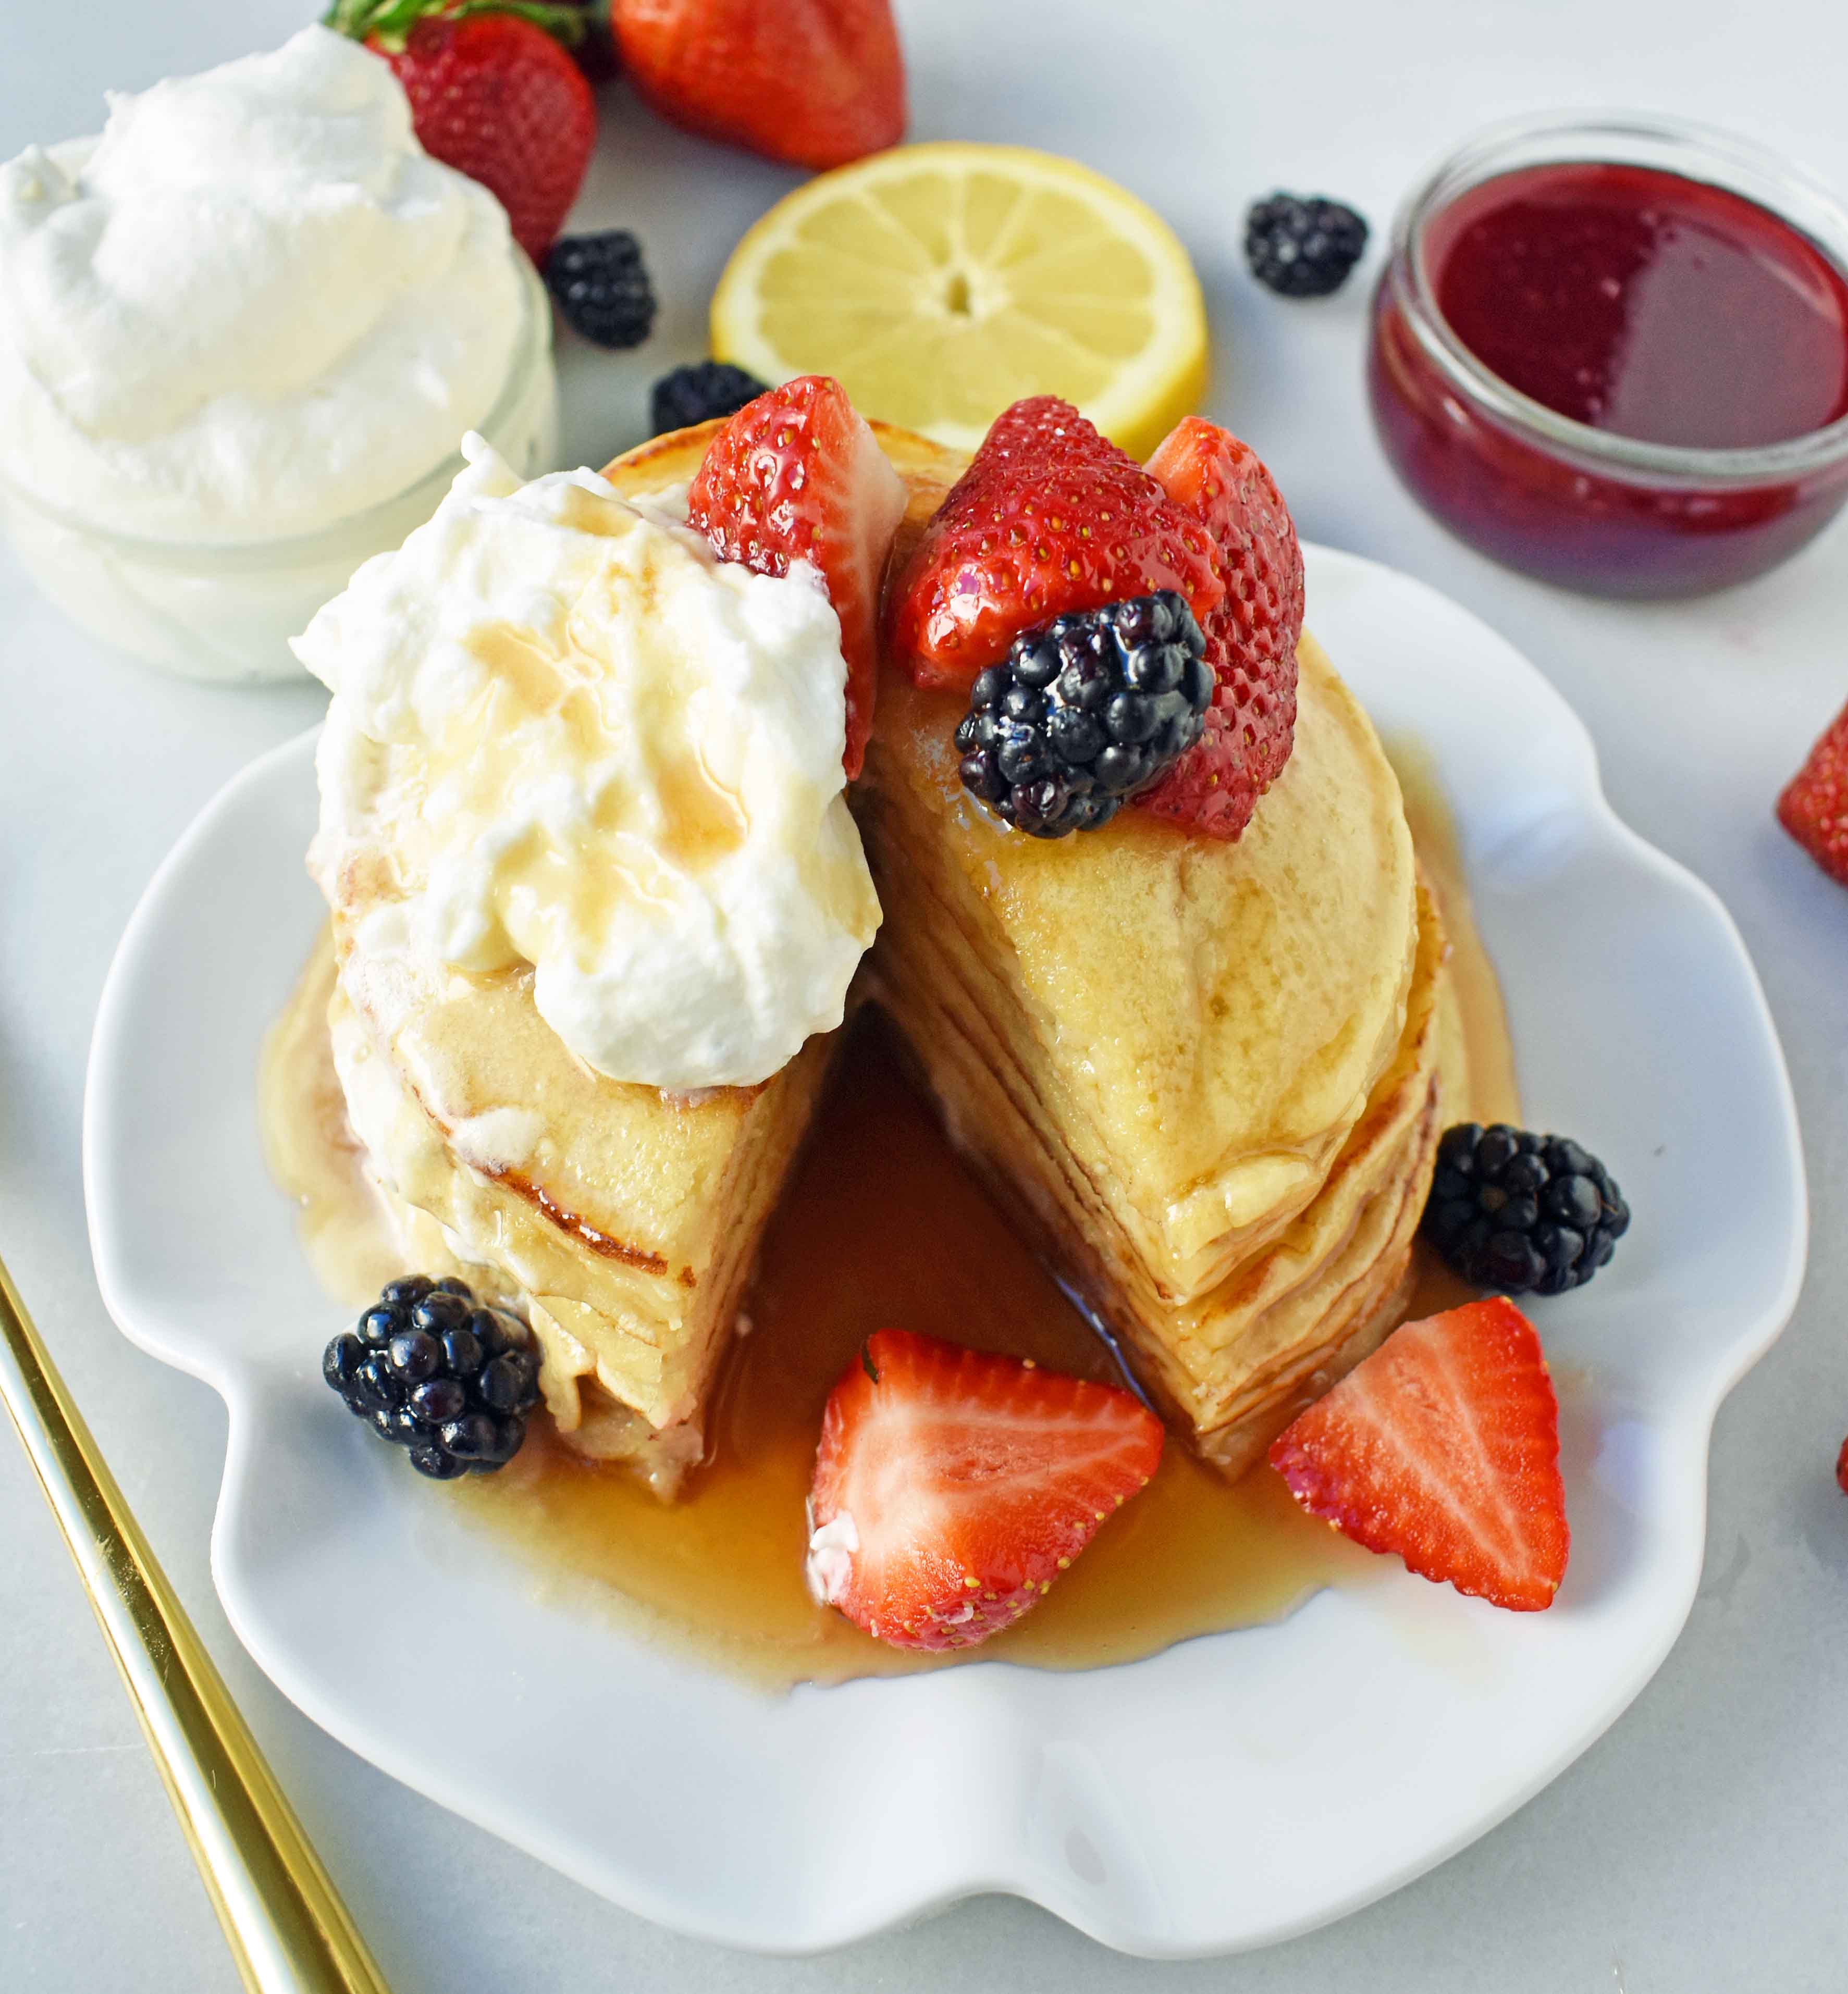 Sweet Cream Ricotta Pancakes are the perfect combination of a silky, creamy crepe and a fluffy buttermilk pancake. A family breakfast favorite! www.modernhoney.com